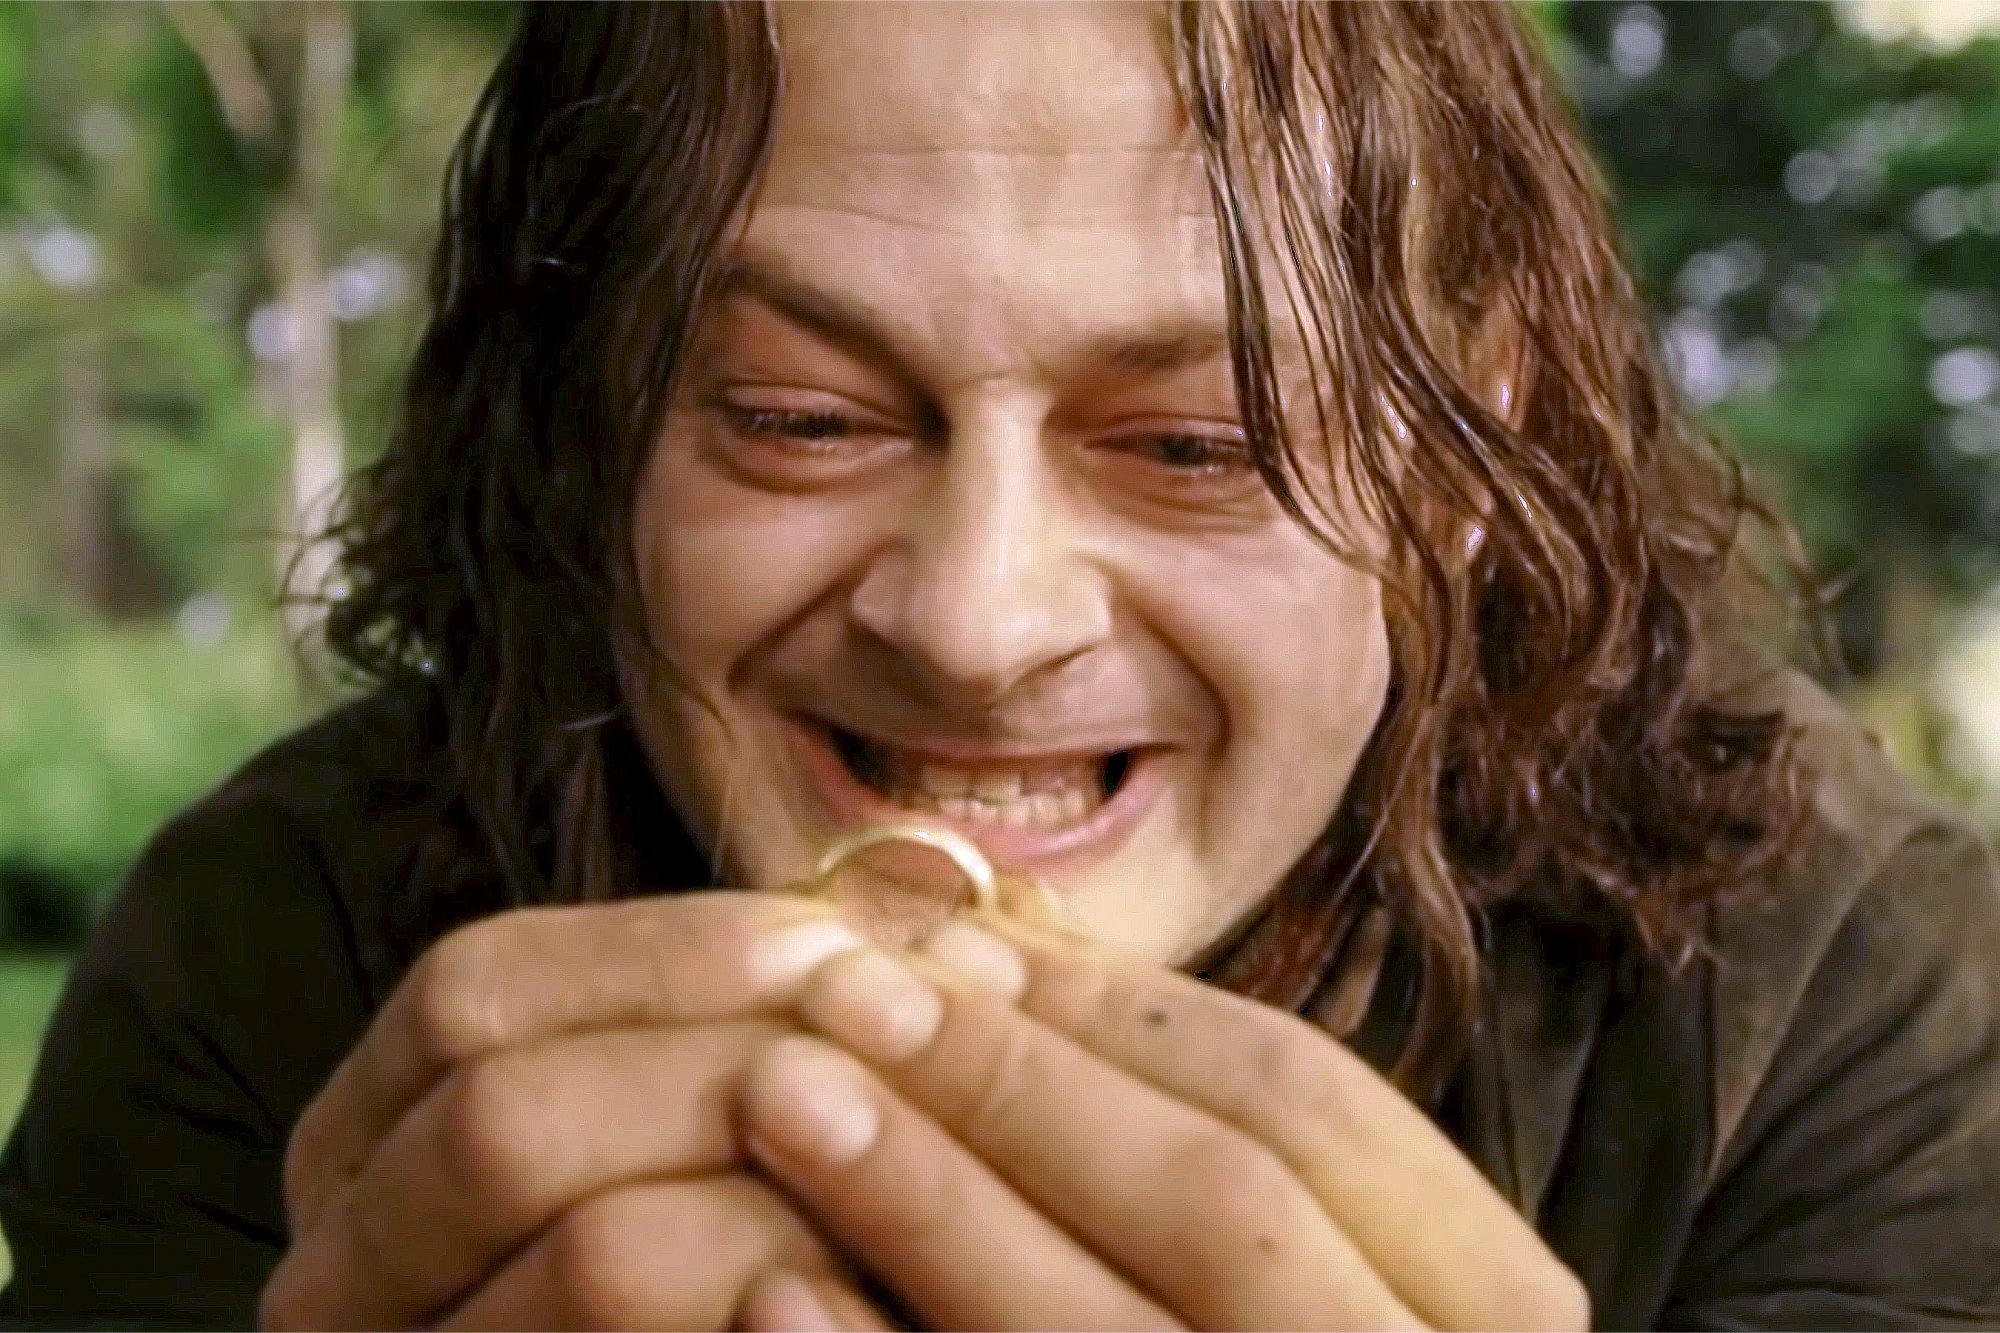 Young Gollum, Lord of the Rings prequel, Youthful portrayal, Character development, 2000x1340 HD Desktop